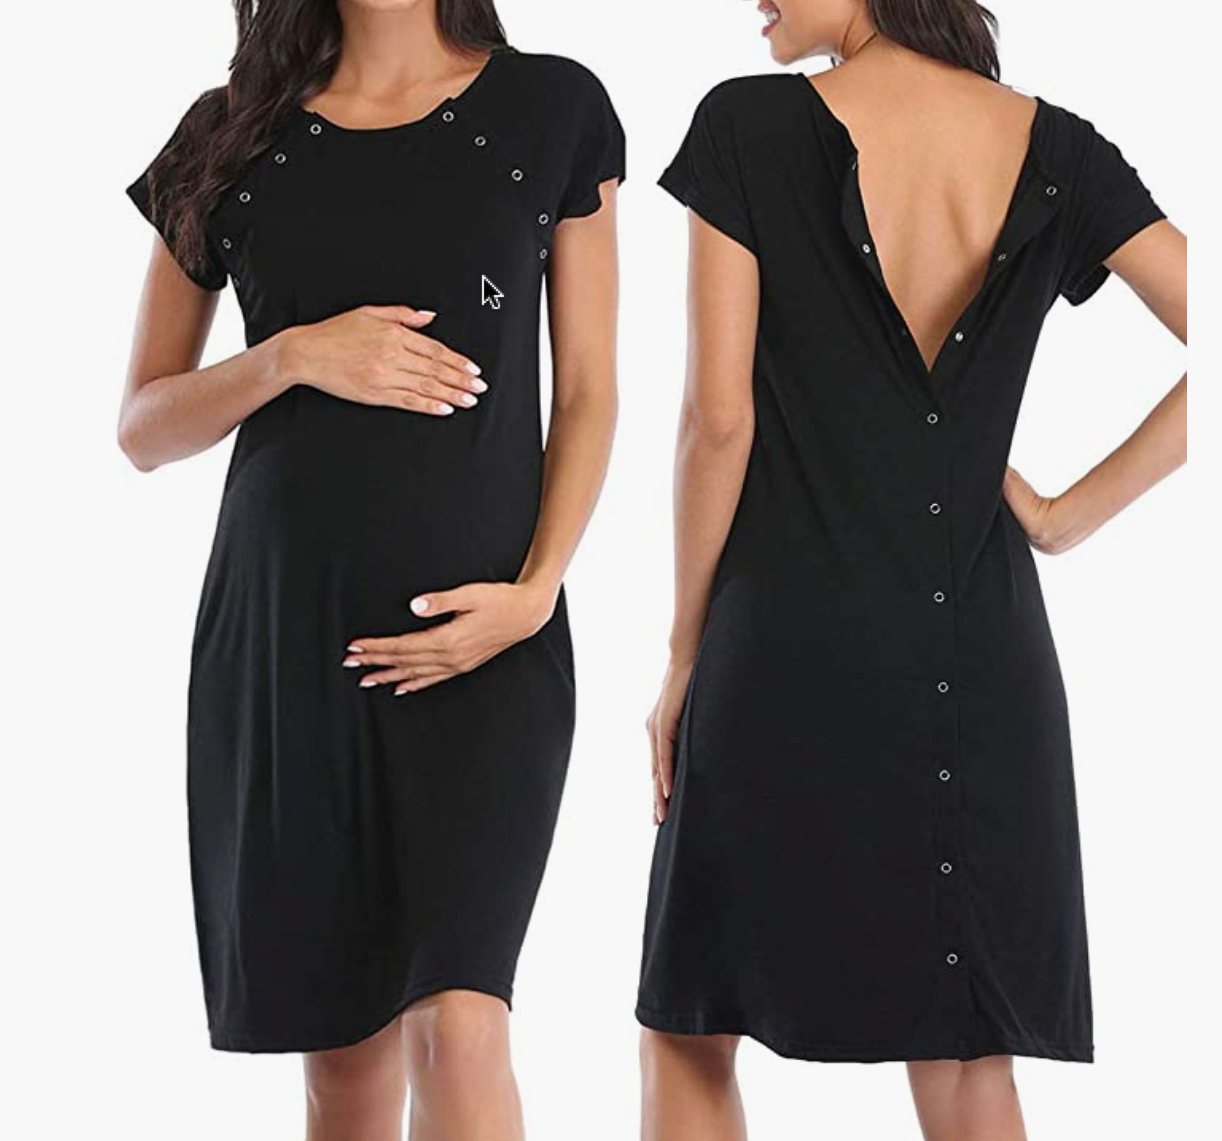 Stylish and Functional Delivery Gown for a Comfortable Delivery